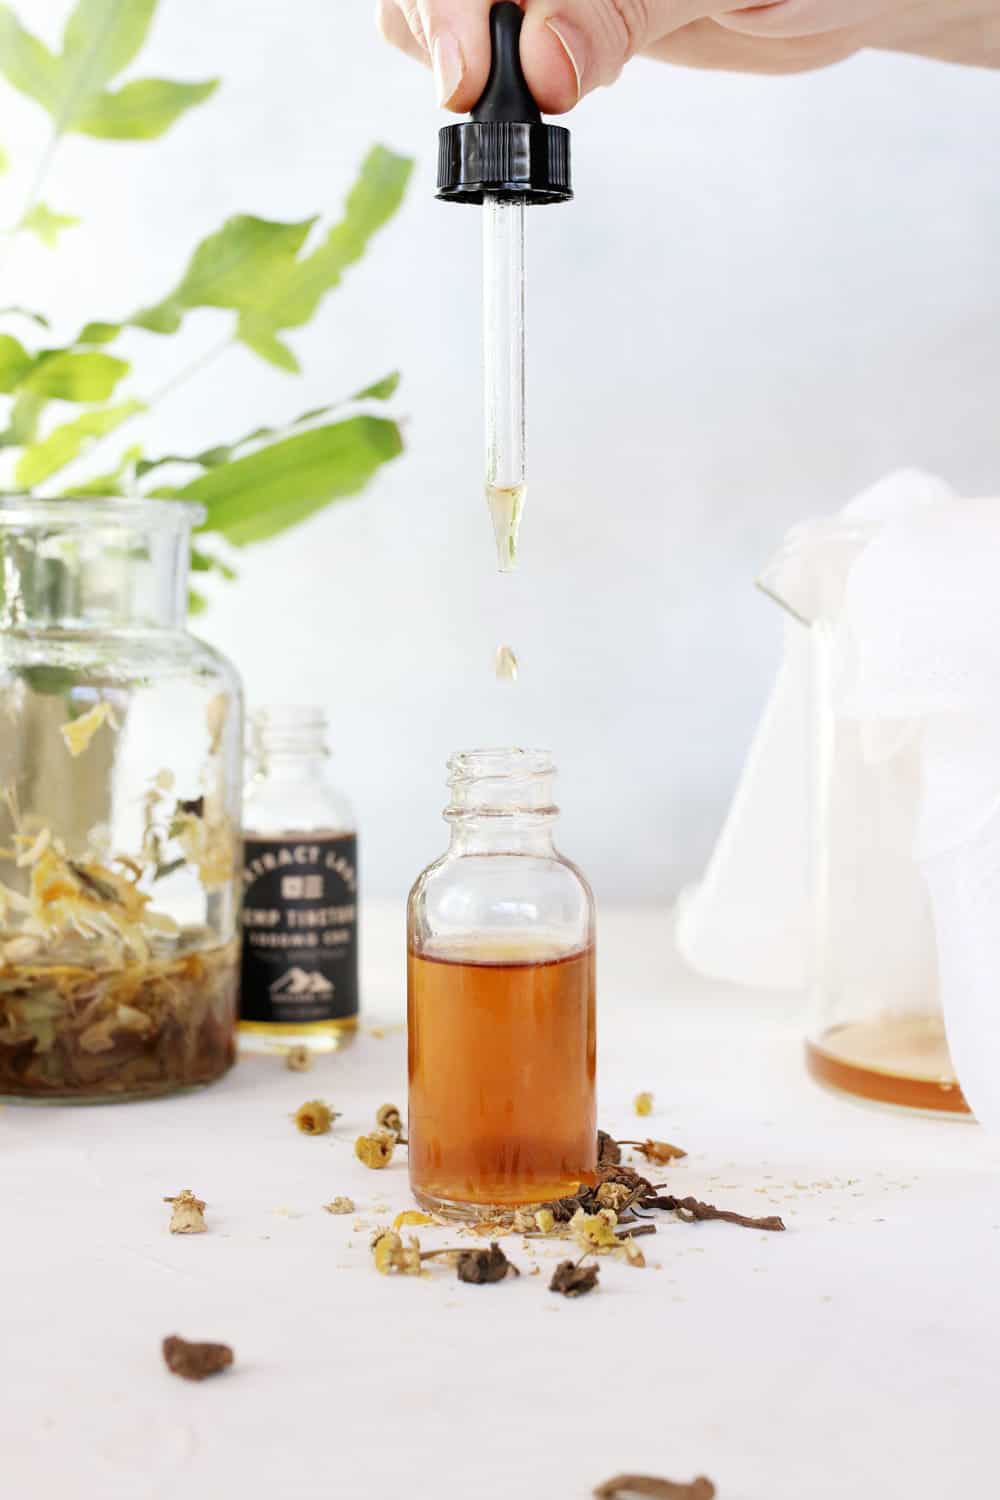 Ingredients for a relaxing herbal tincture with cbd oil